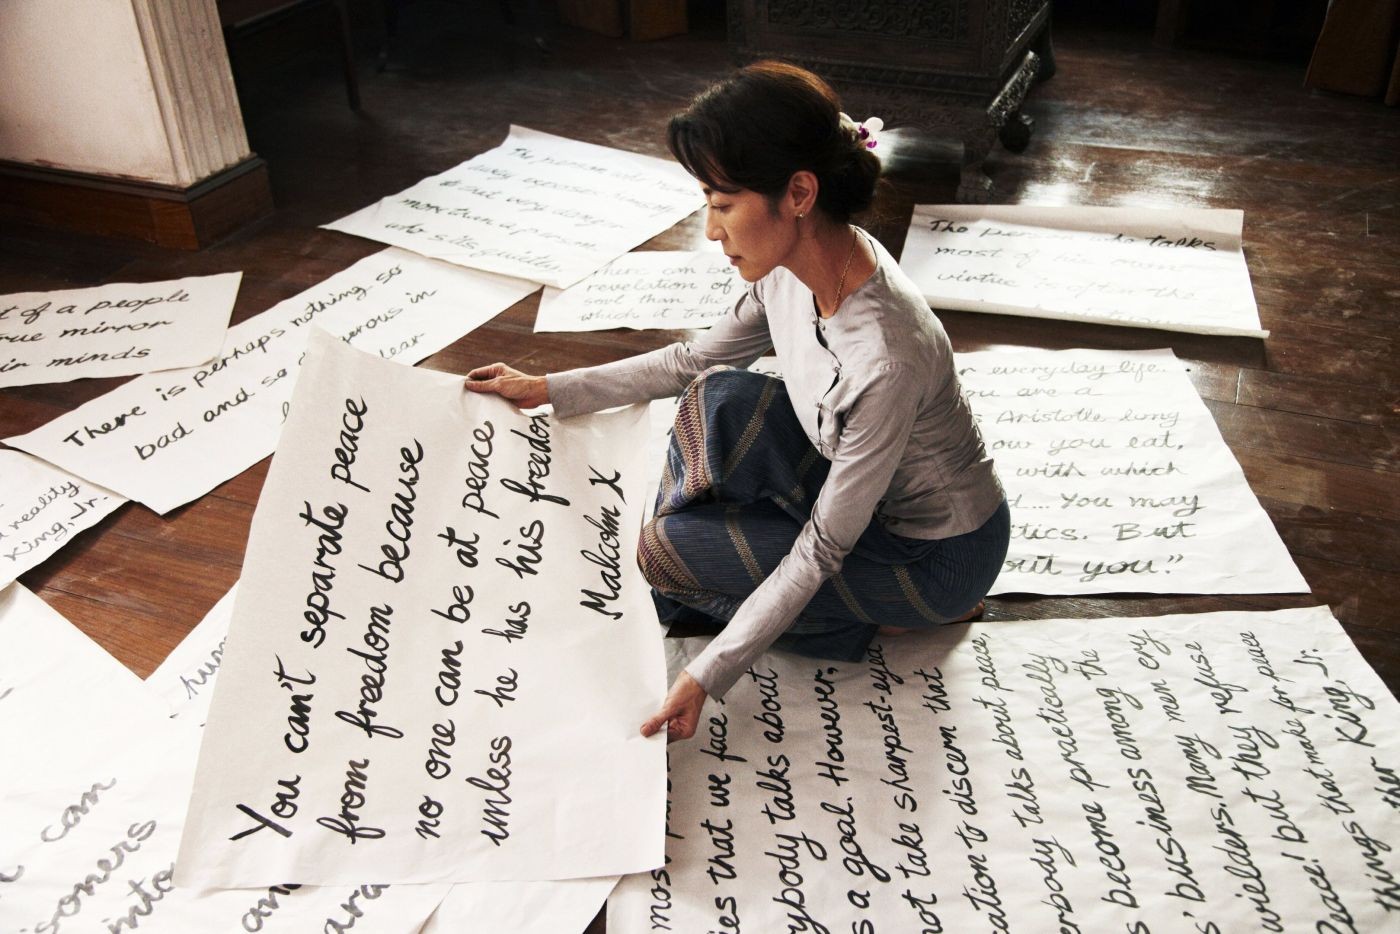 Michelle Yeoh stars as Aung San Suu Kyi in Cohen Media Group's The Lady (2012)